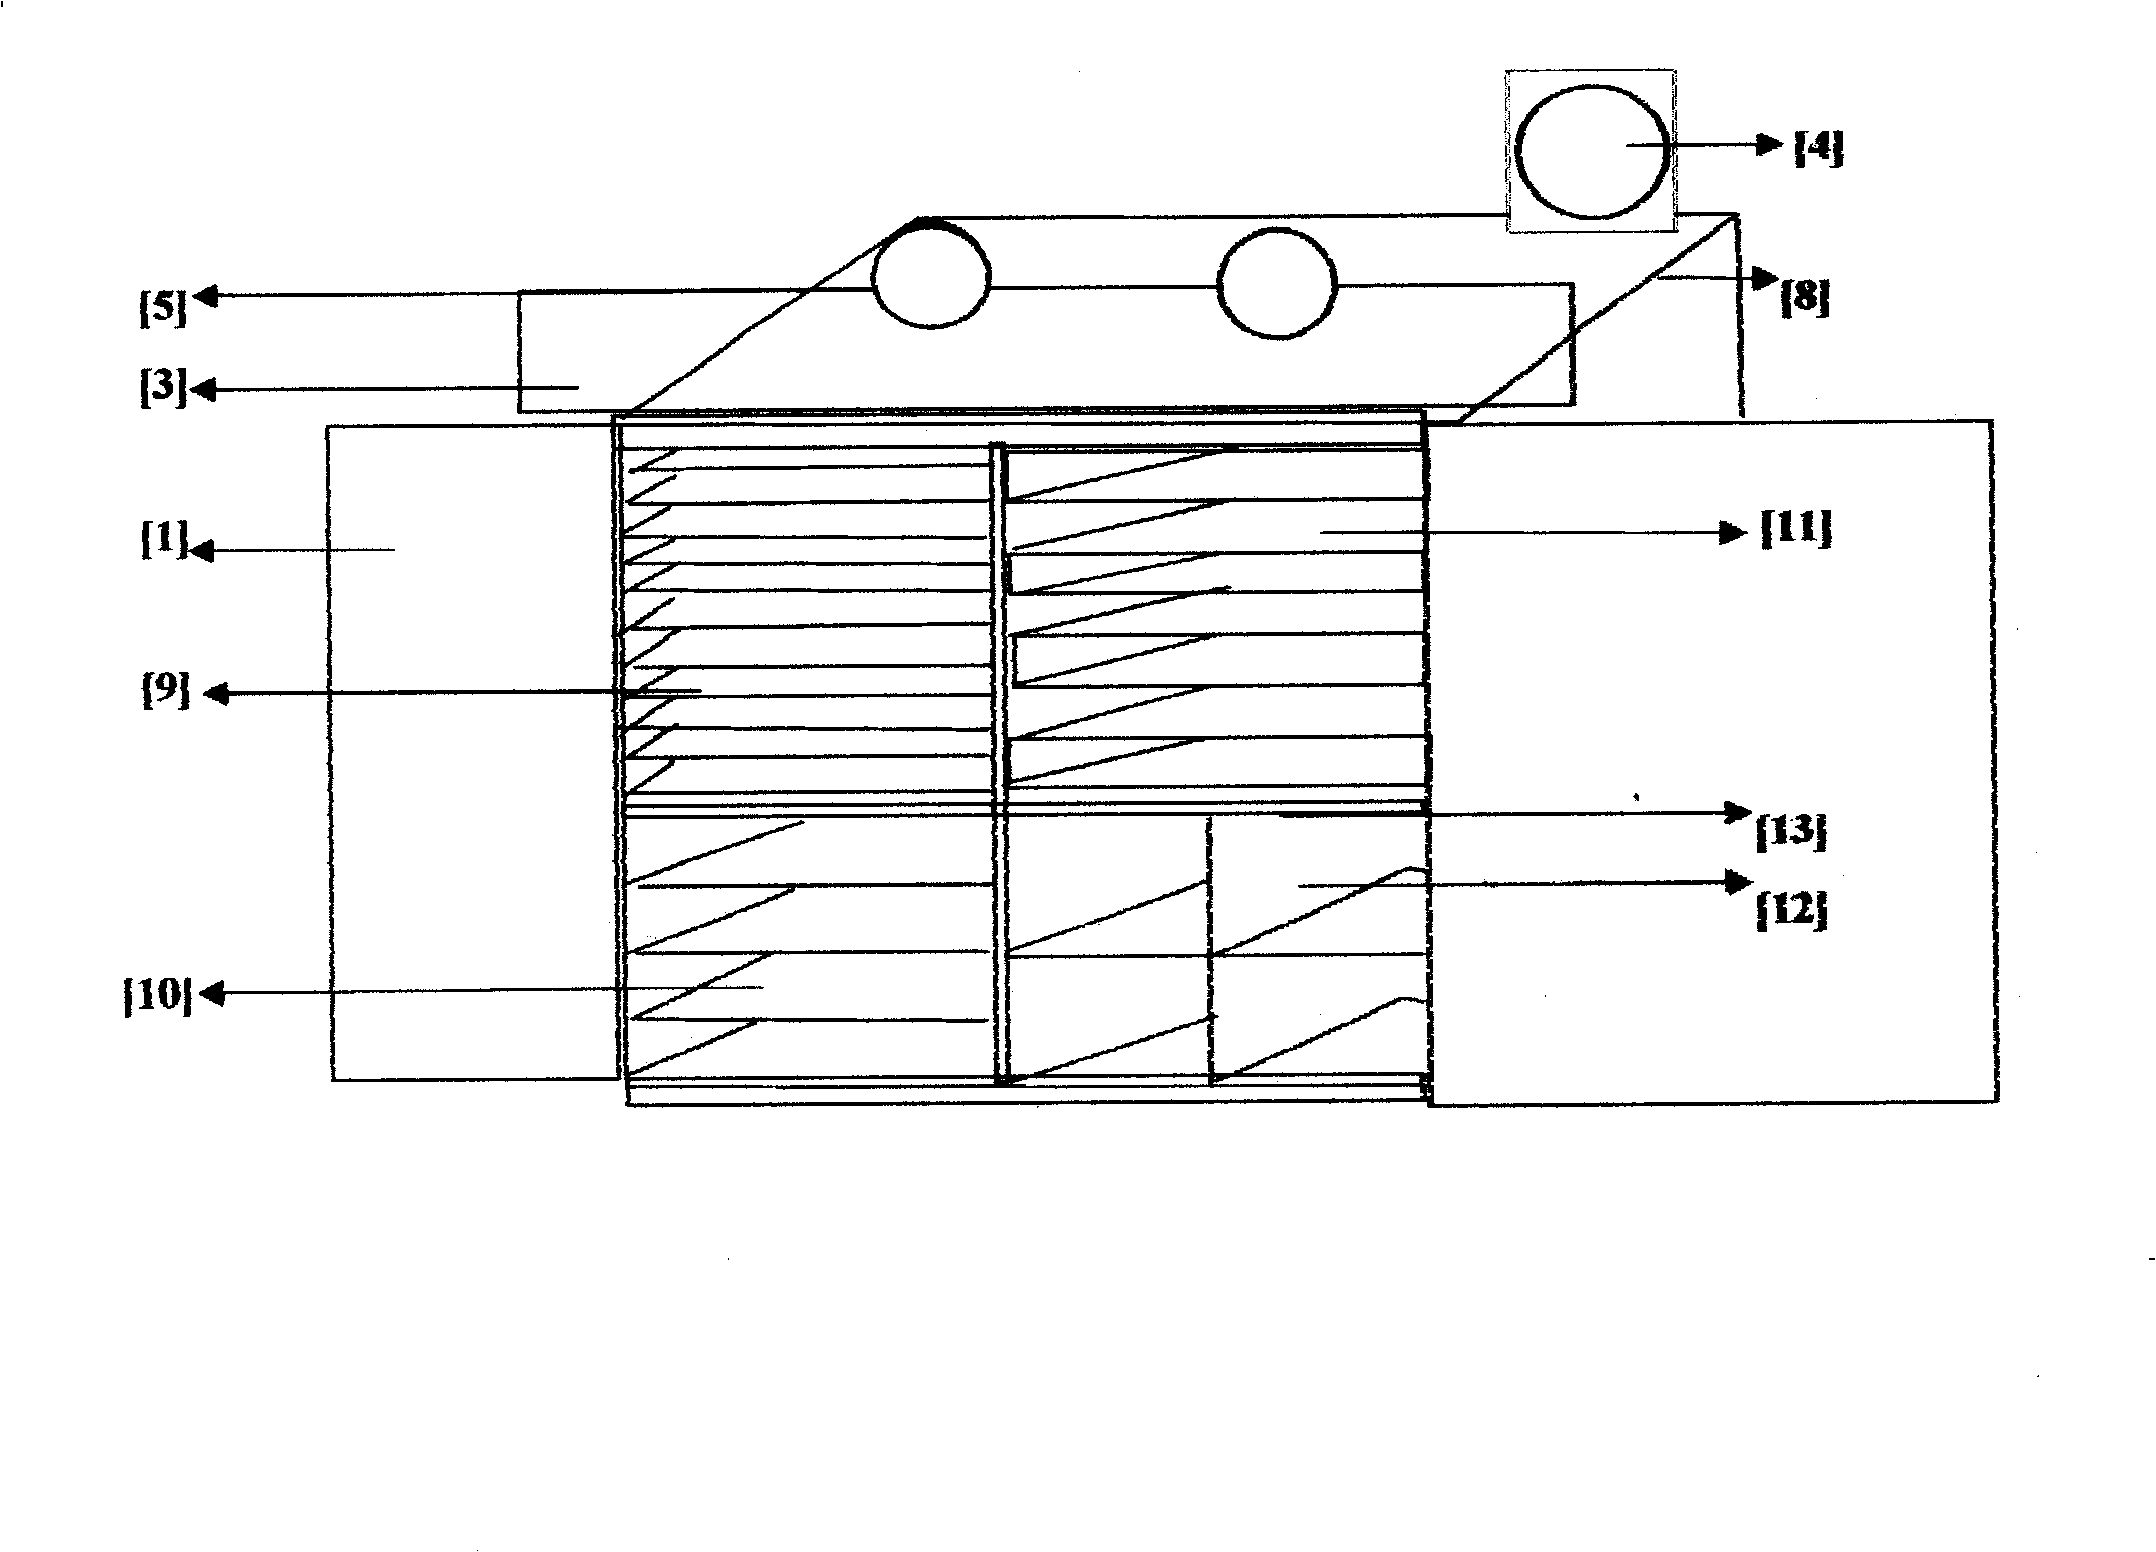 Large-sized producing device machine tool on-site management data box